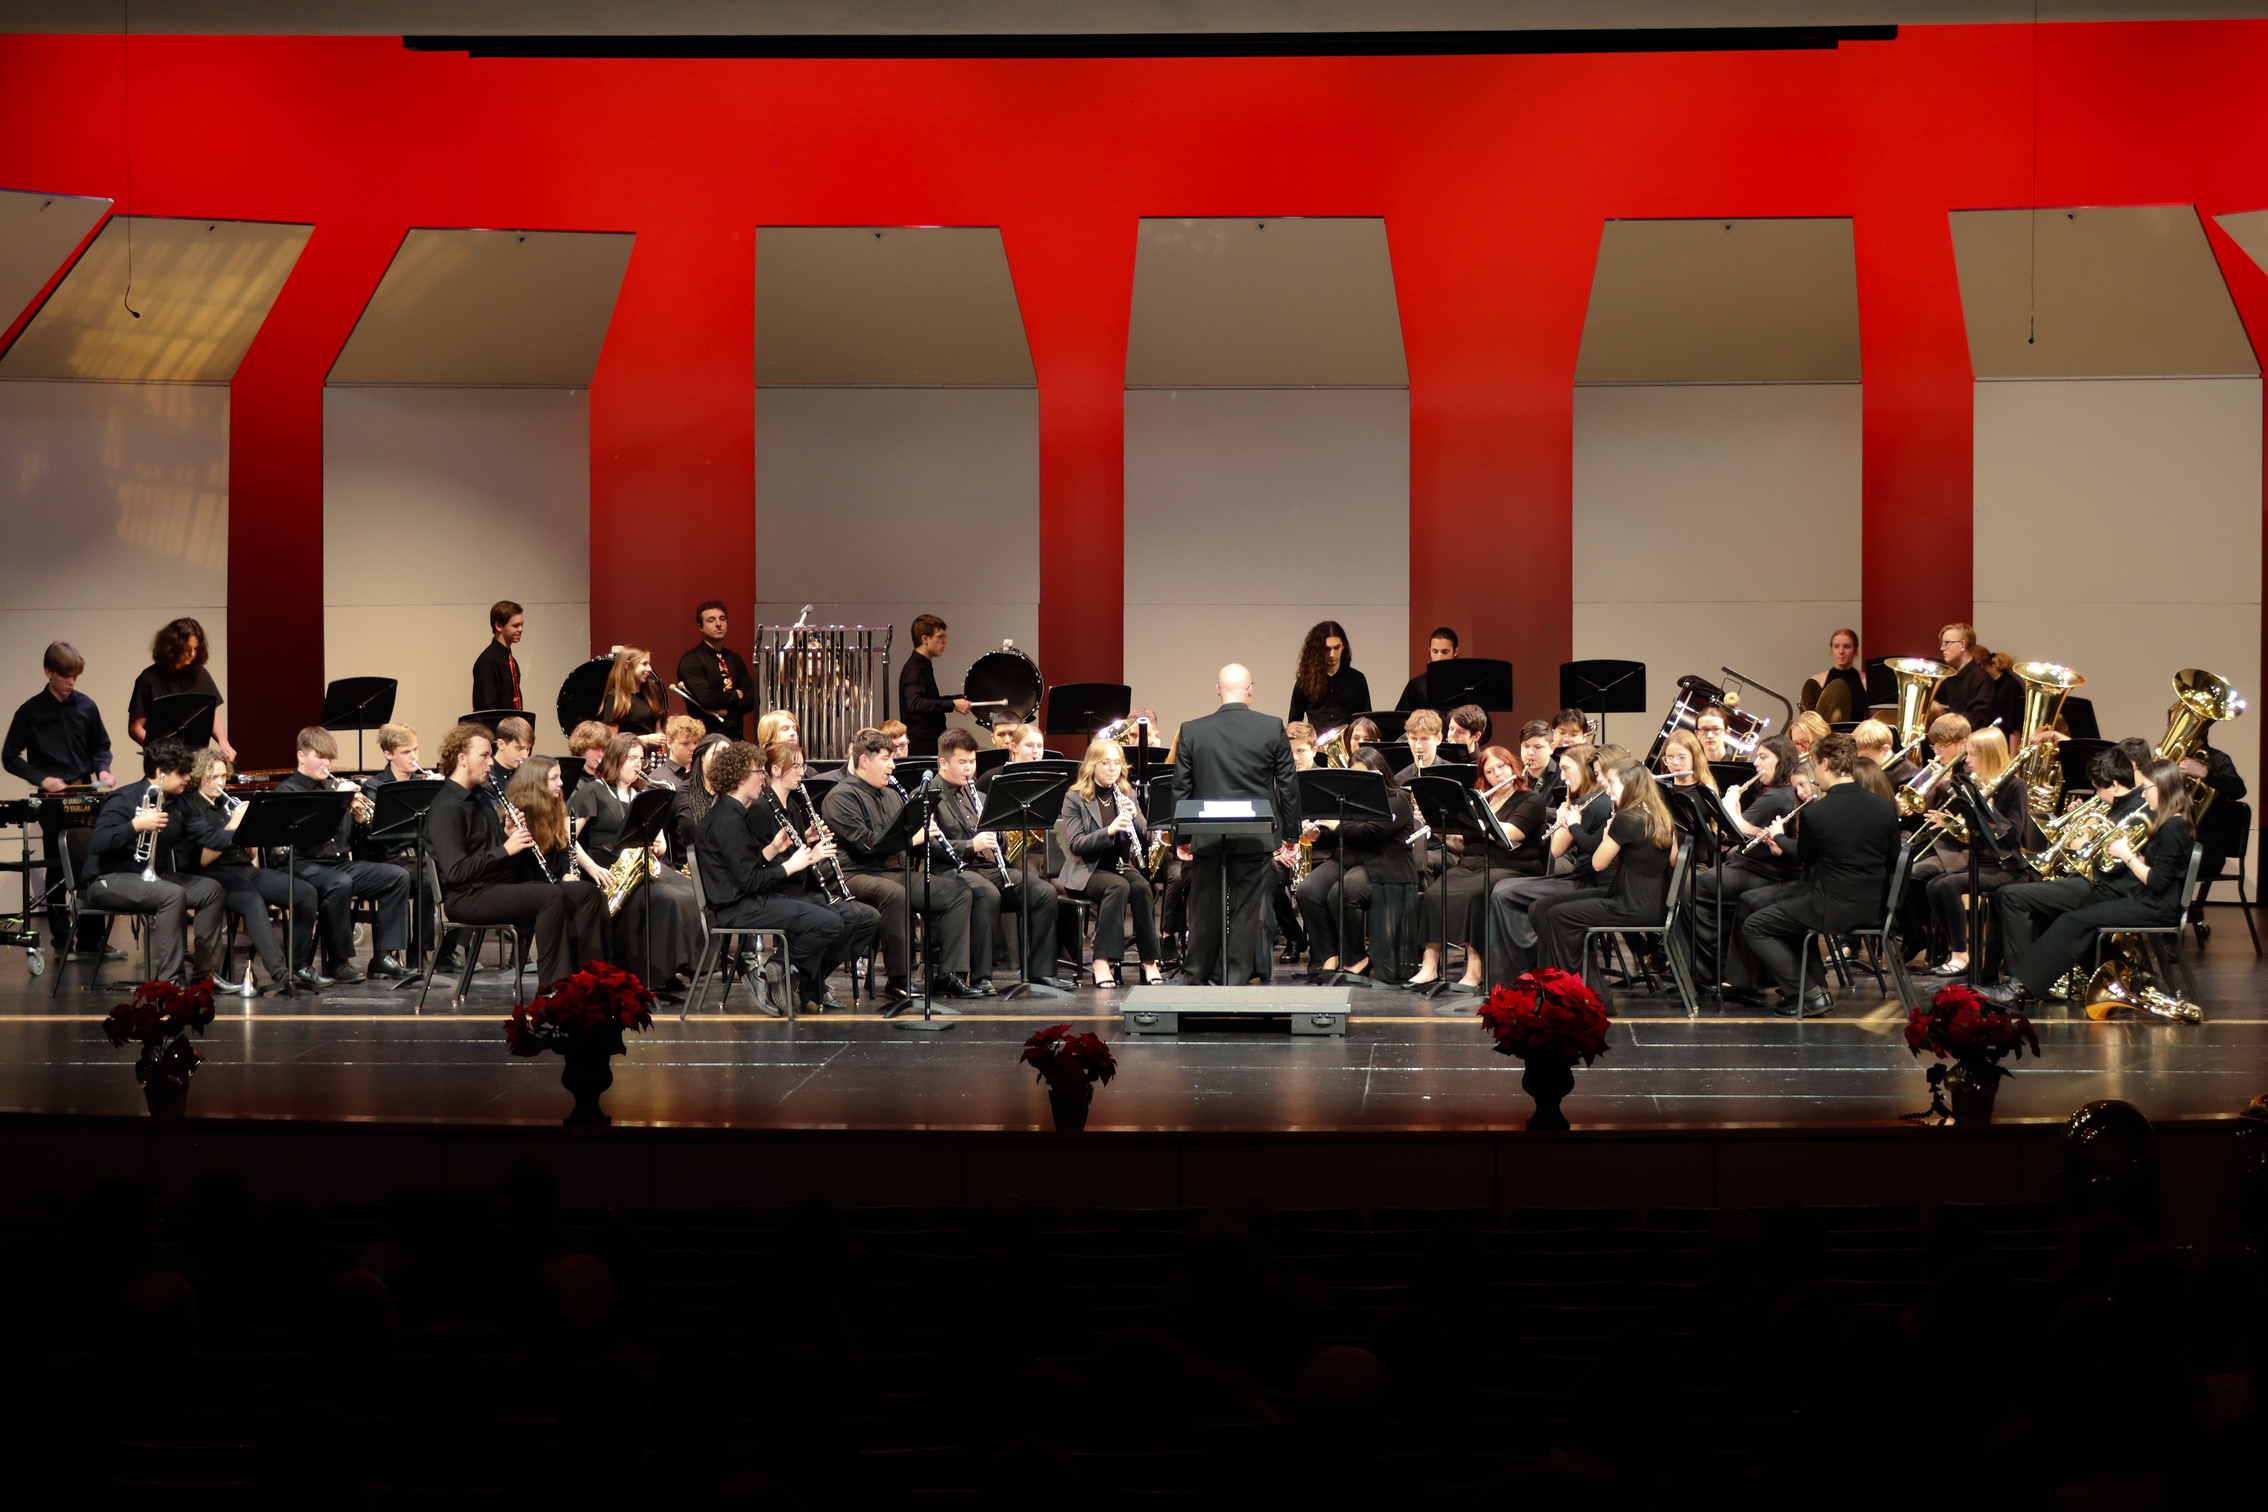 Shawnee Mission West Marching Band on stage at the 2022 Winter Band Concert